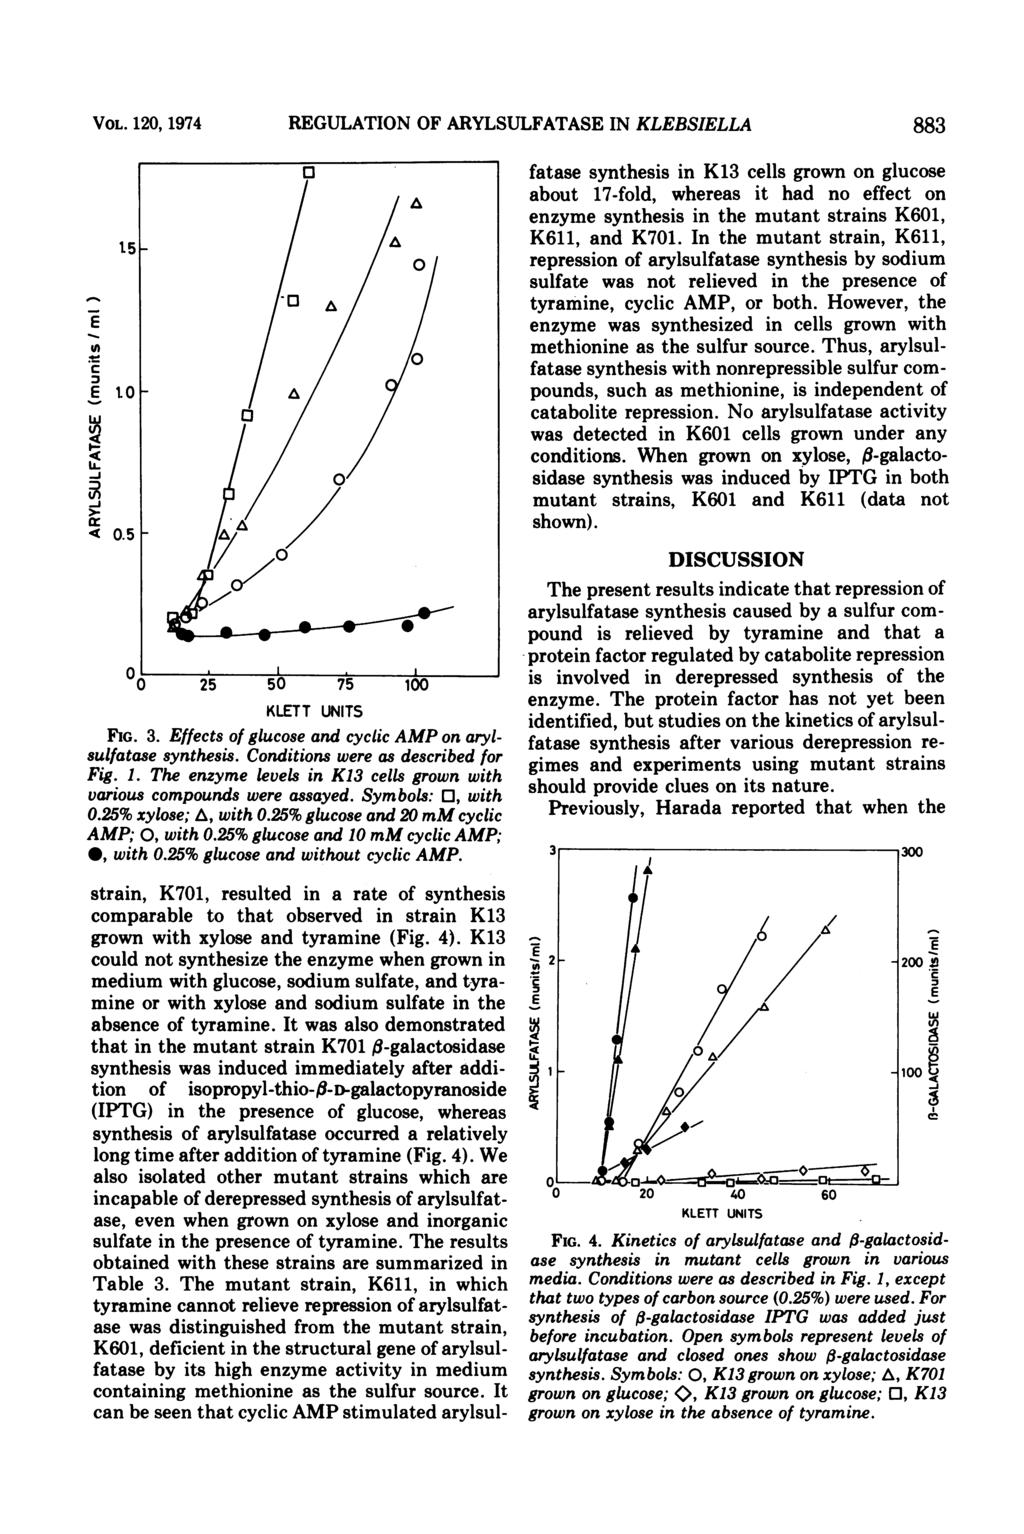 VOL. 120, 1974 REGULATION OF ARYLSULFATASE IN KLEBSIELLA 883 0 fatase synthesis in K13 cells grown on glucose about 17-fold, whereas it had no effect on enzyme synthesis in the mutant strains K601,